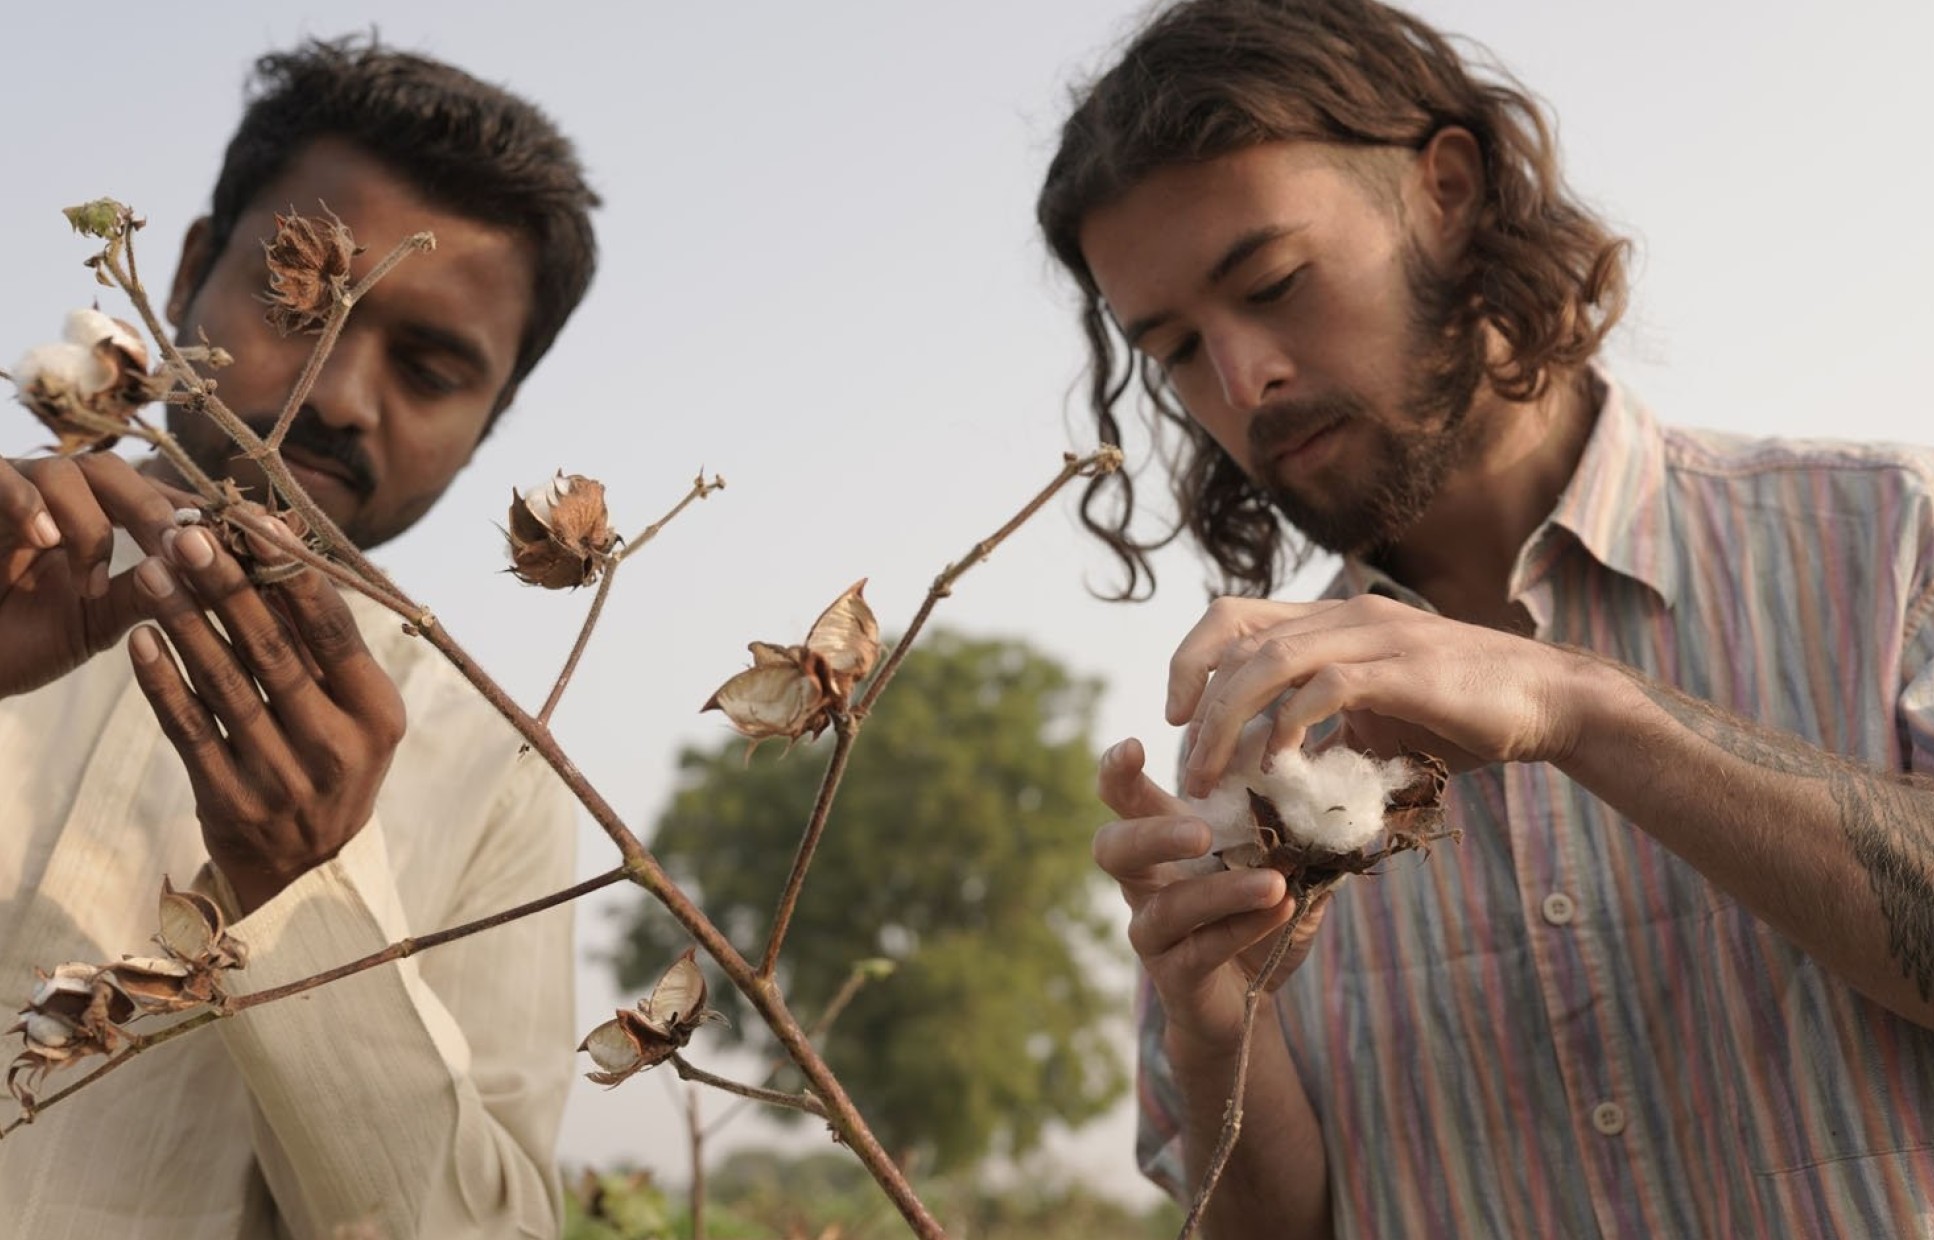 Two people picking cotton in India